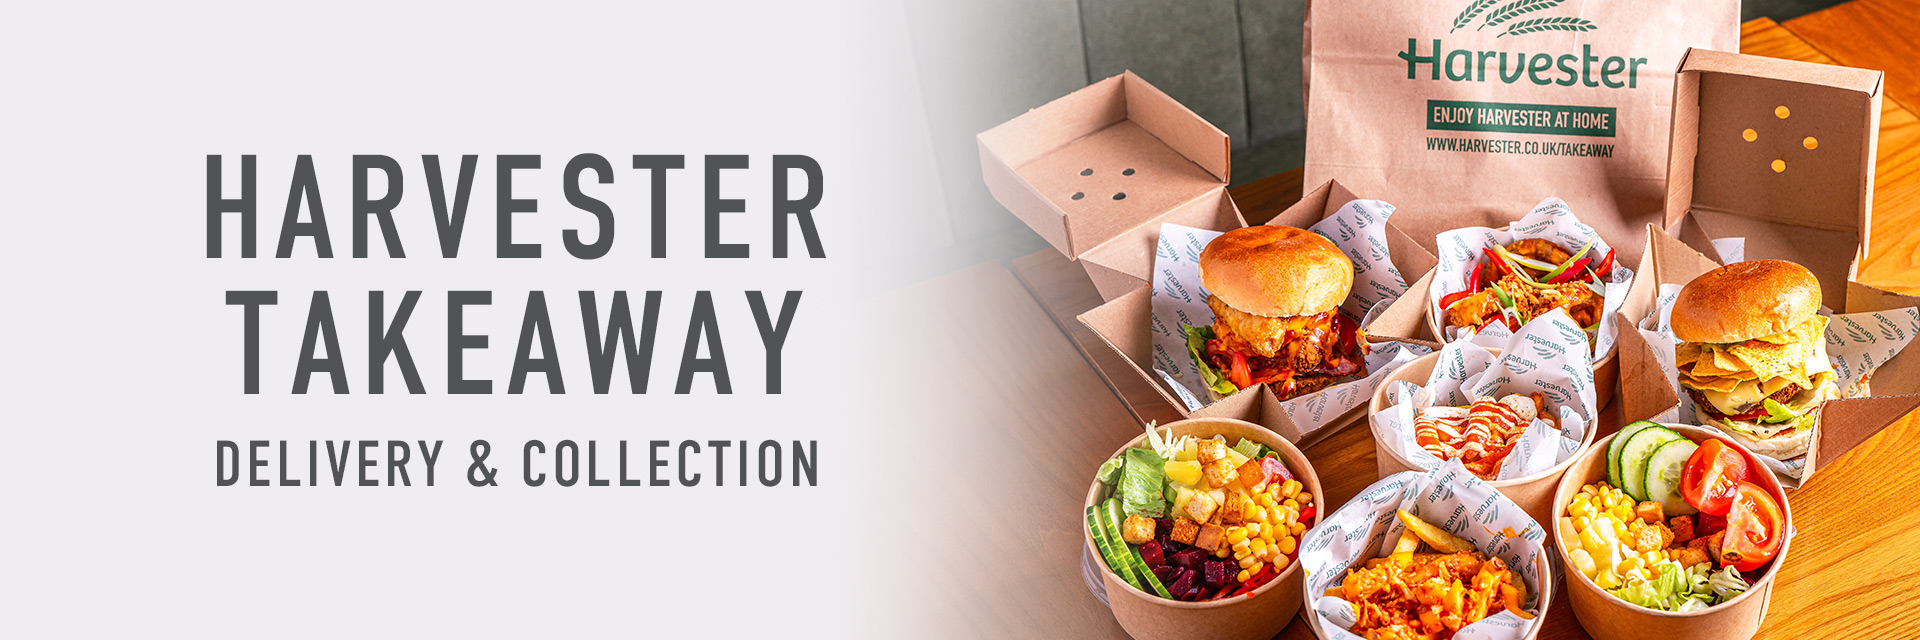 Ryhope Harvester takeaway, delivery, collection